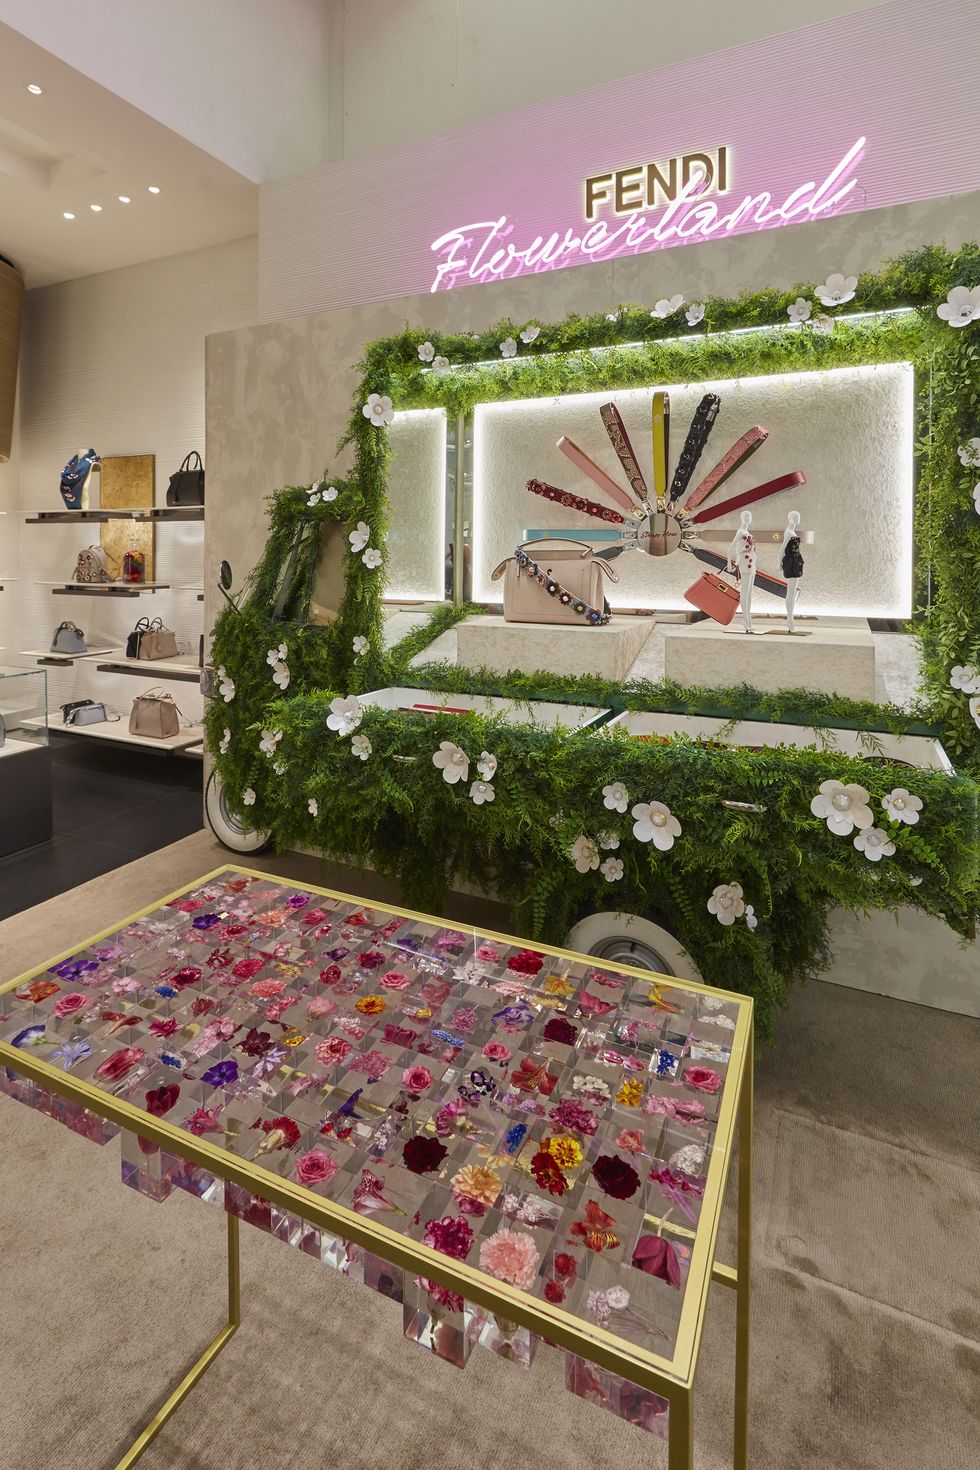 <p>To celebrate Fendi Flowerland, the main inspiration of its S/S 16 collection, the brand has opened a pop-up inside Selfridges with a flower shop by the renowned Japanese flower artist Azuma Makoto. Visitors are invited to enter Fendi's petal-filled world, complete with a three-wheeled Italian mini-truck. During the first fortnight you can watch a flower artisan from Makoto's studio create unique floral bottles that will be available for purchase. <em>Visit <a href="http://selfridges.com">selfridges.com</a>.</em></p><p><em>Image courtesy of Fendi </em></p>